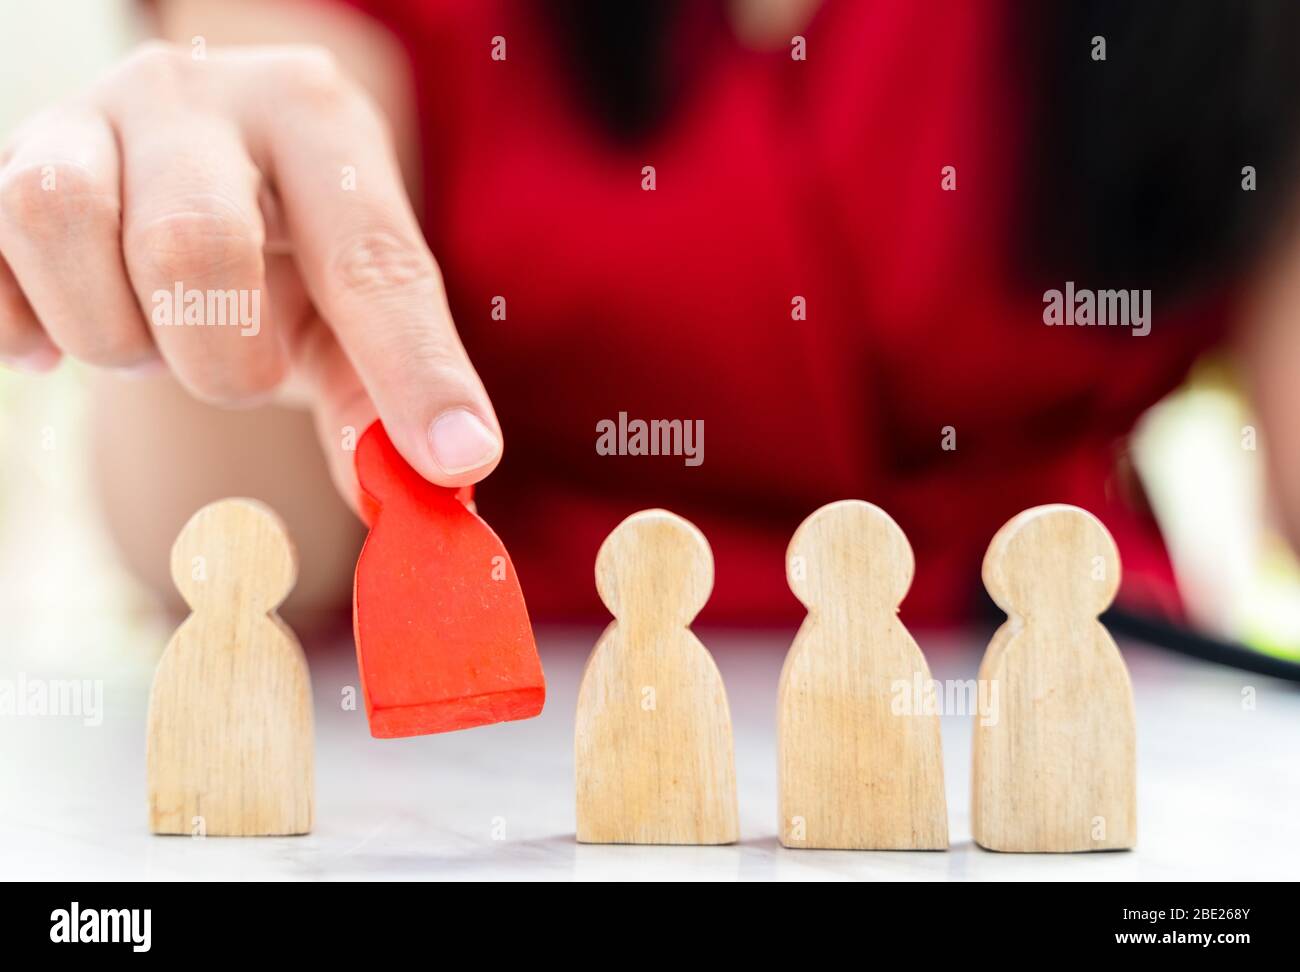 Figure in human resource management concept. The red wood figure was picked out of its group. Red Wood figure like who is selected from the candidate, Stock Photo